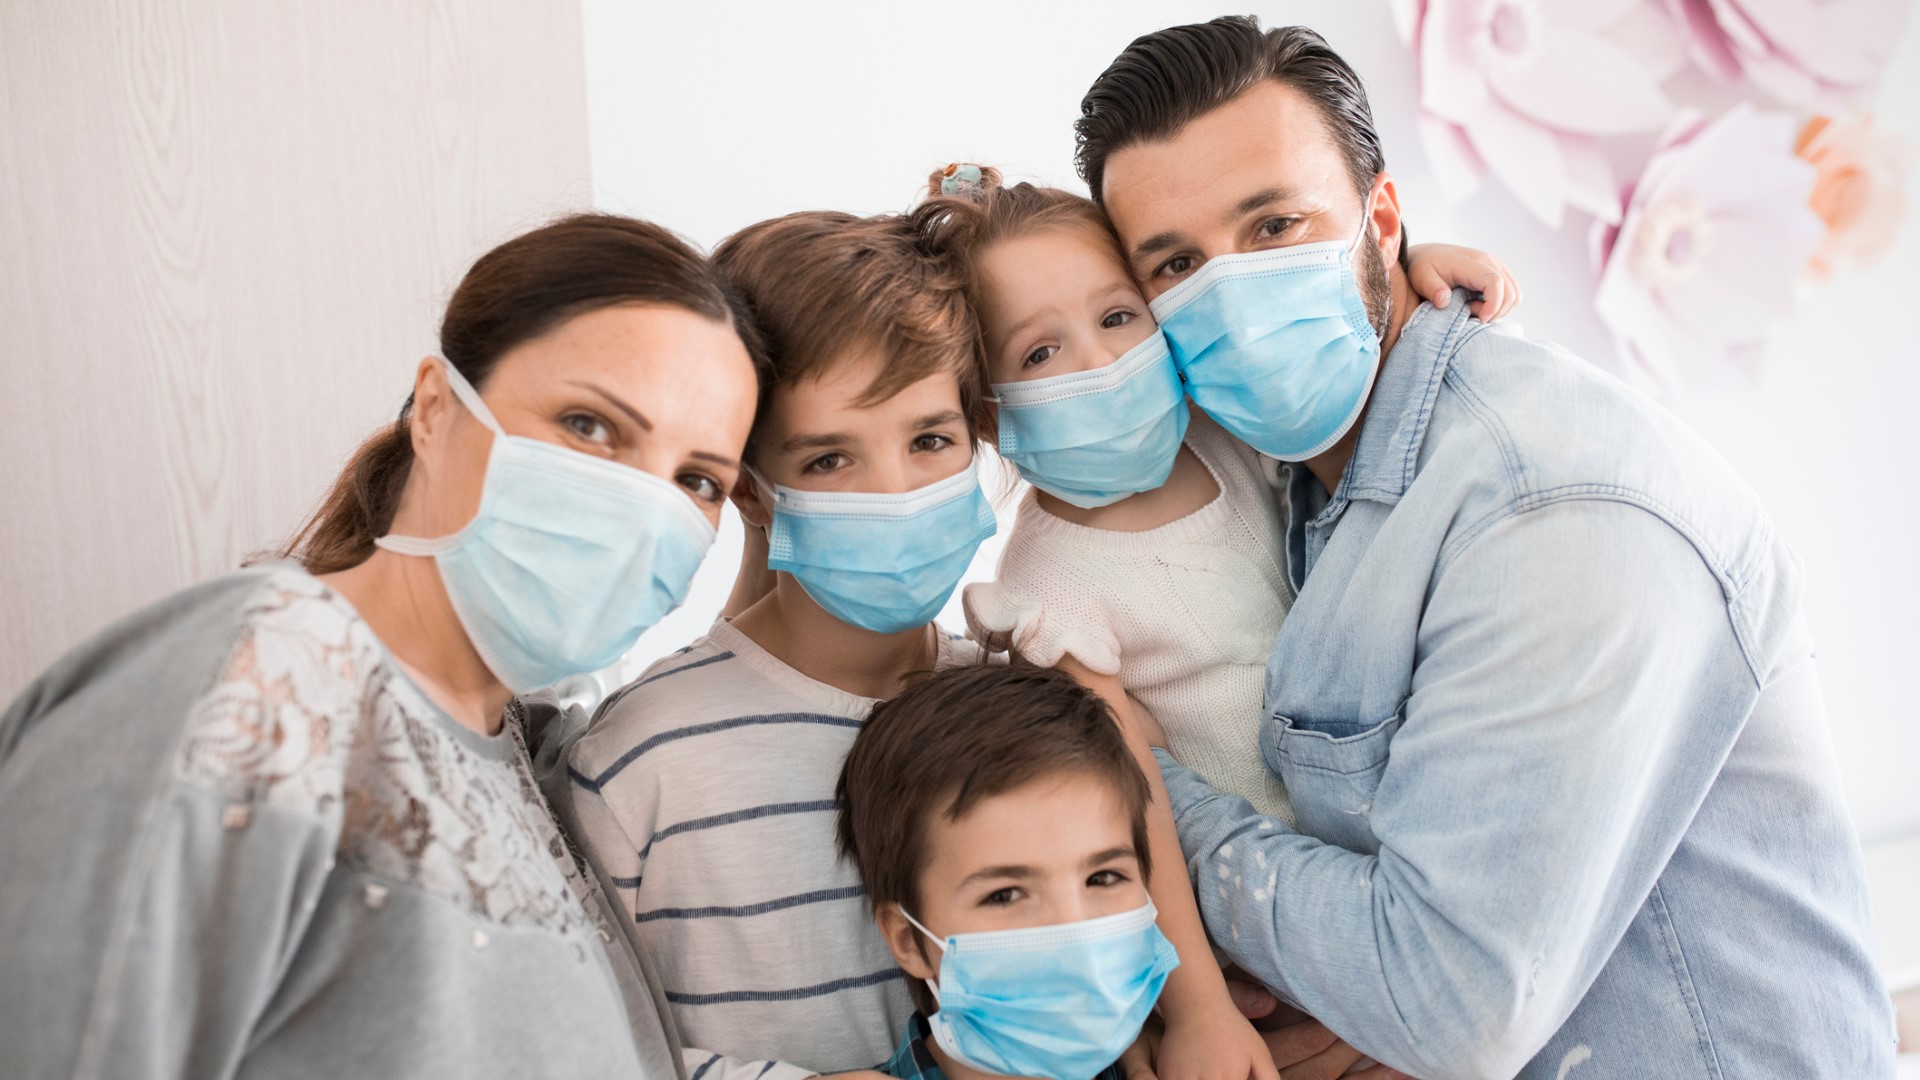 9Health Expert Dr. Payal Kohli discusses facts and fiction surrounding masks, which health experts recommend wearing during the COVID-19 pandemic.